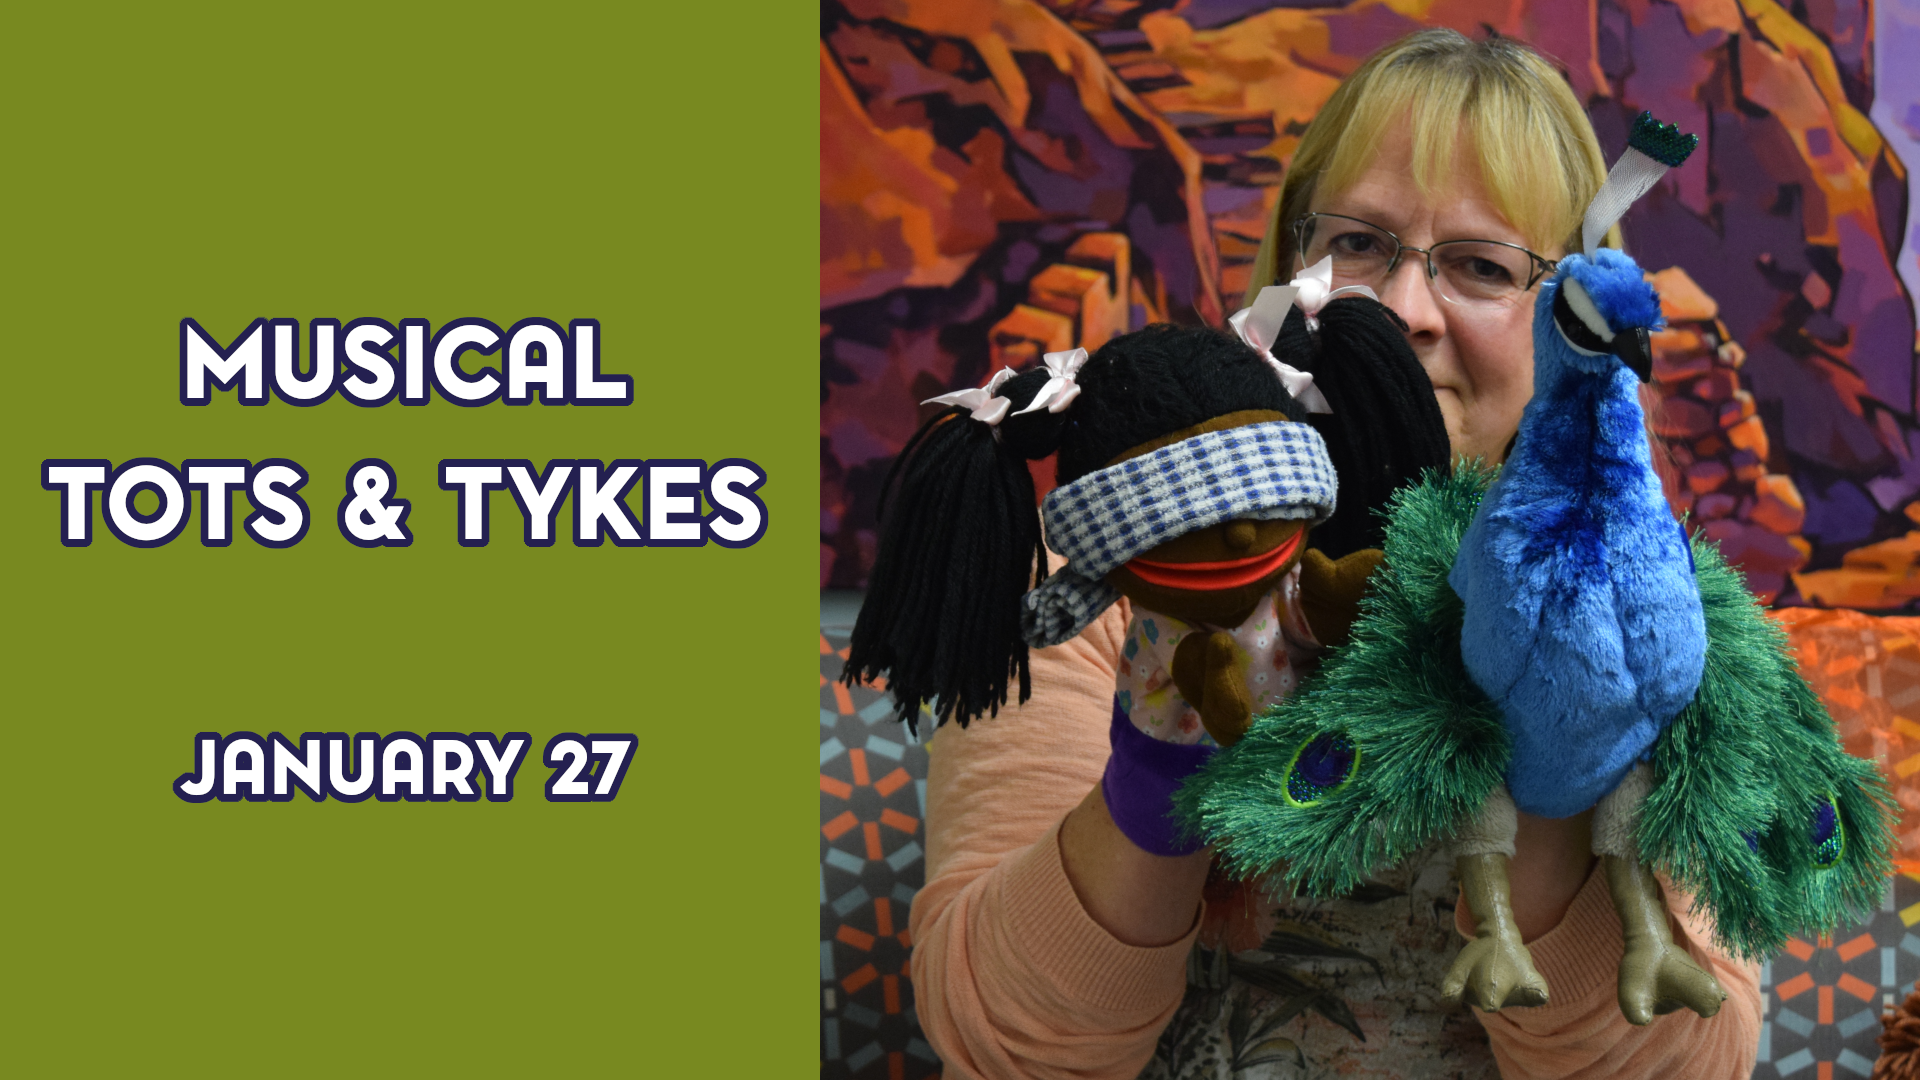 A woman holding puppets next to the text "Musical Tots & Tykes January 27"